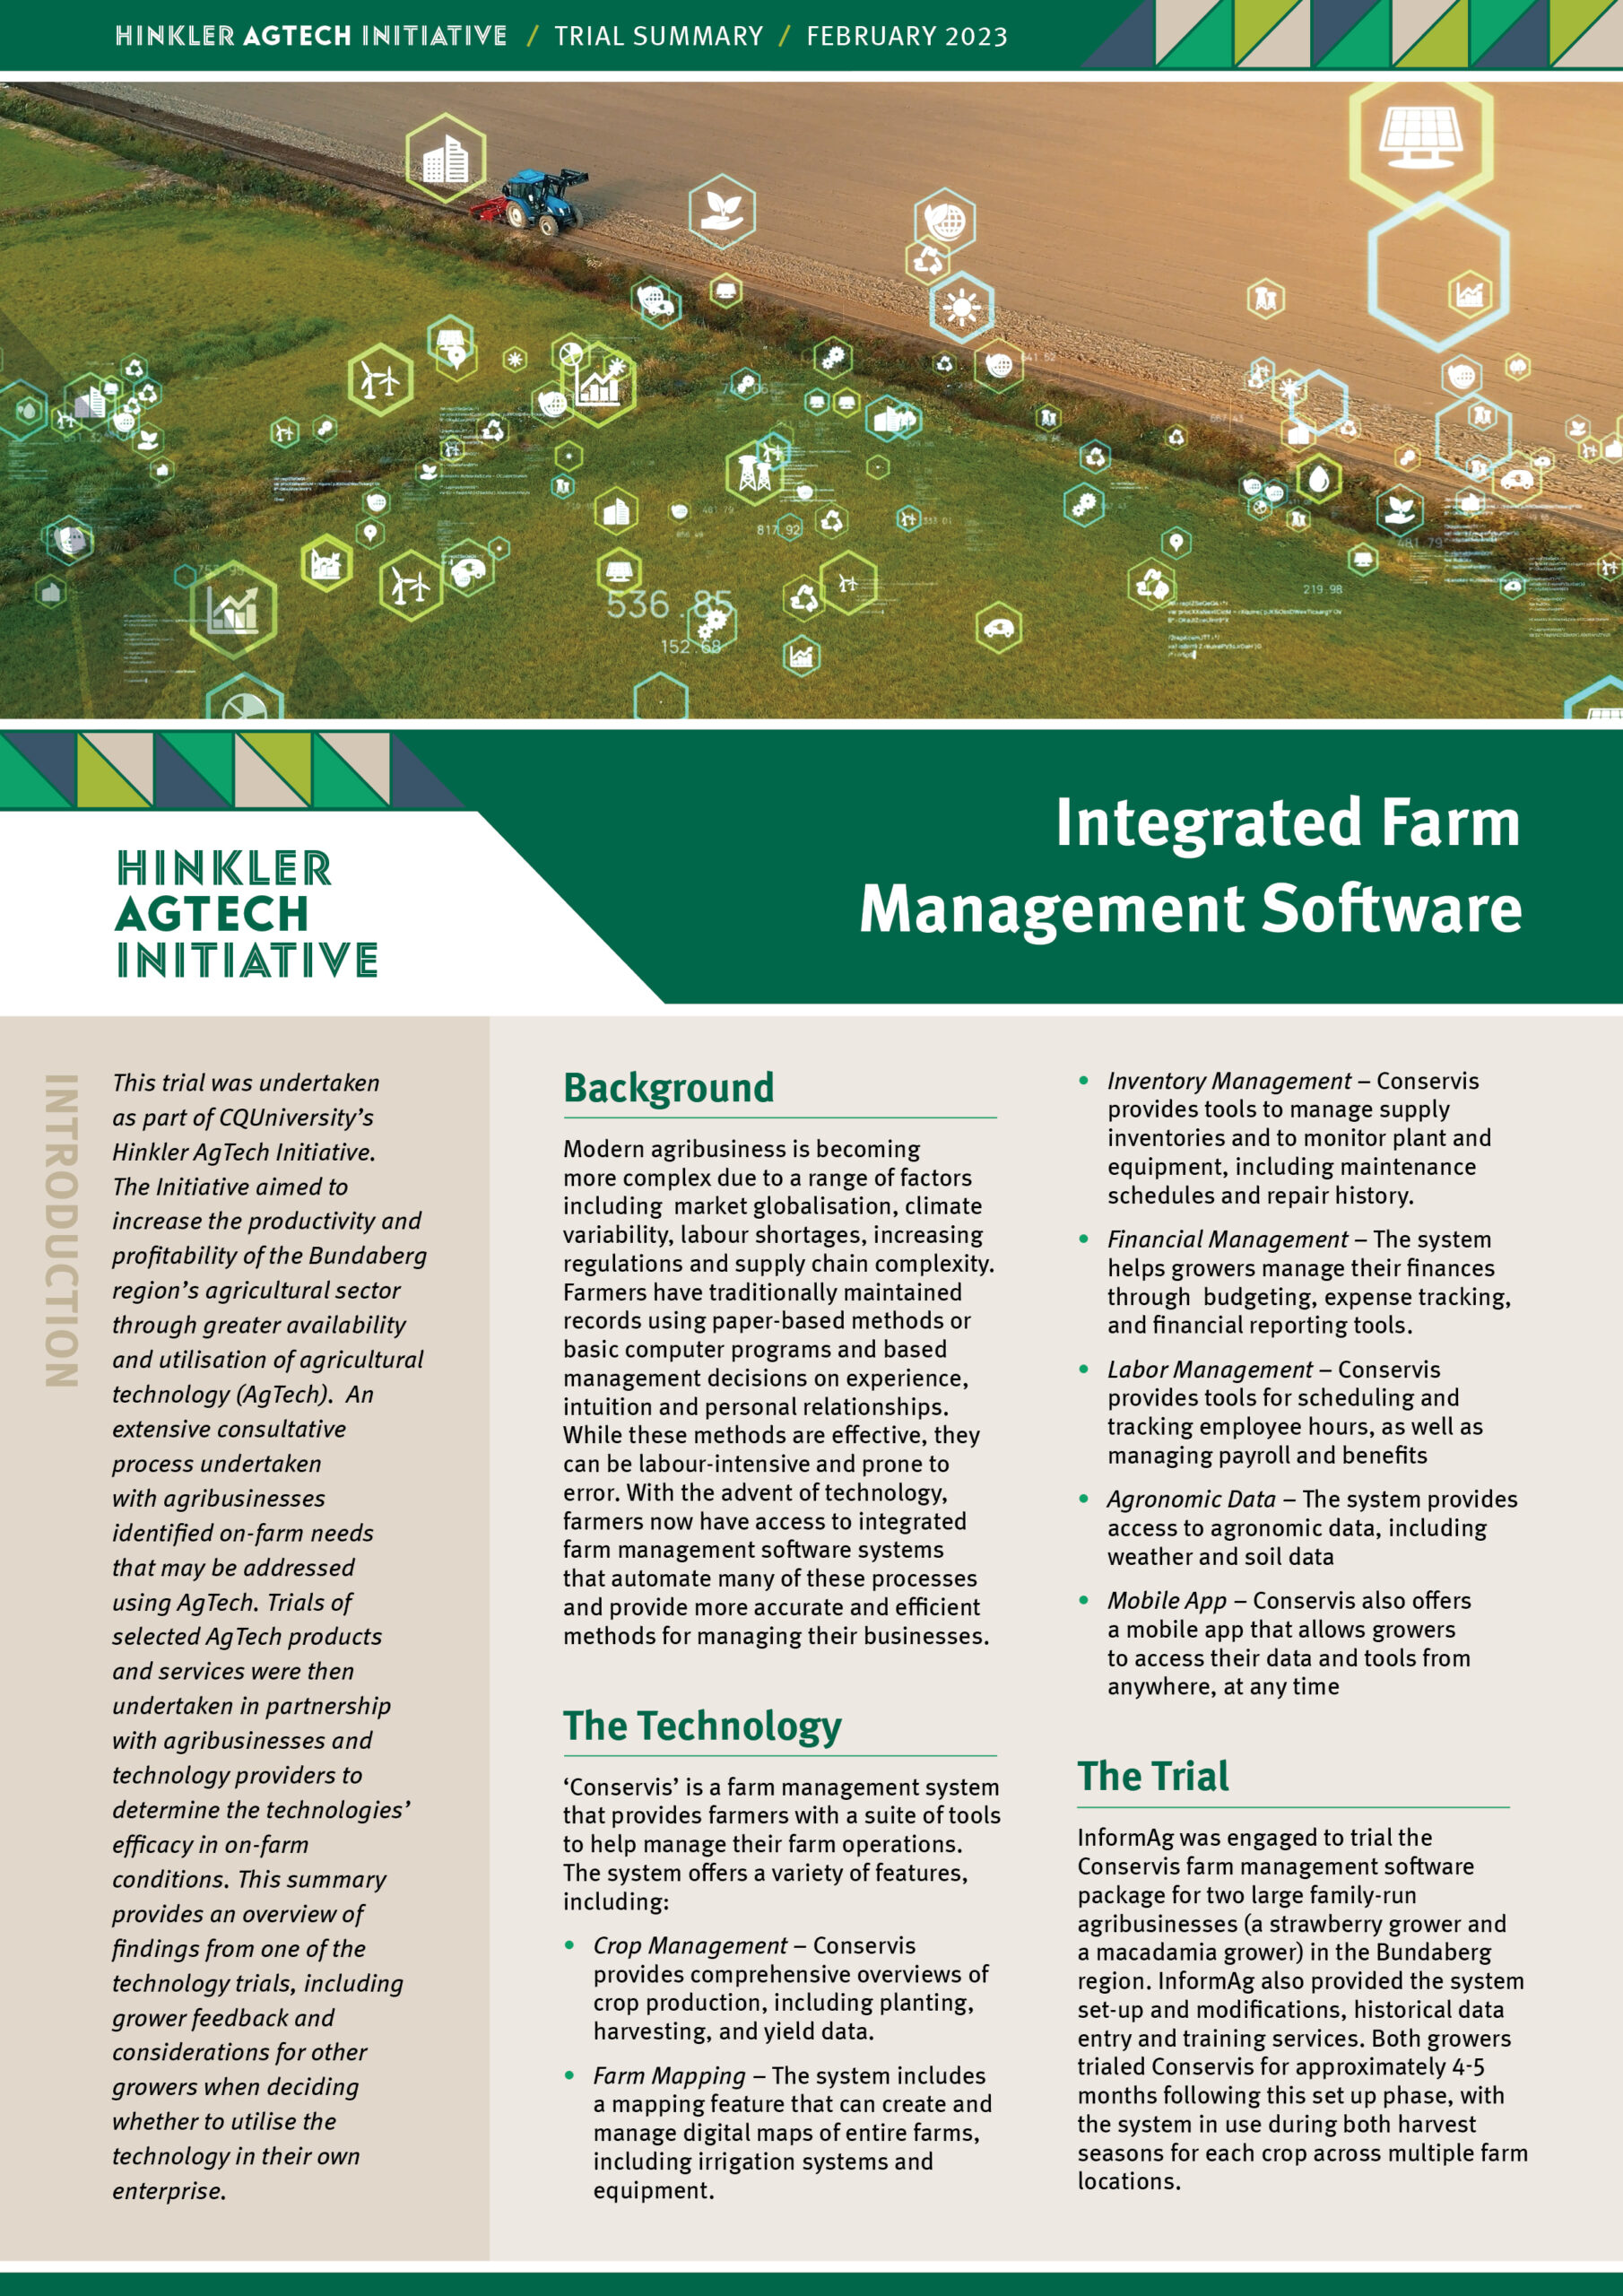 Integrated Farm Management Software